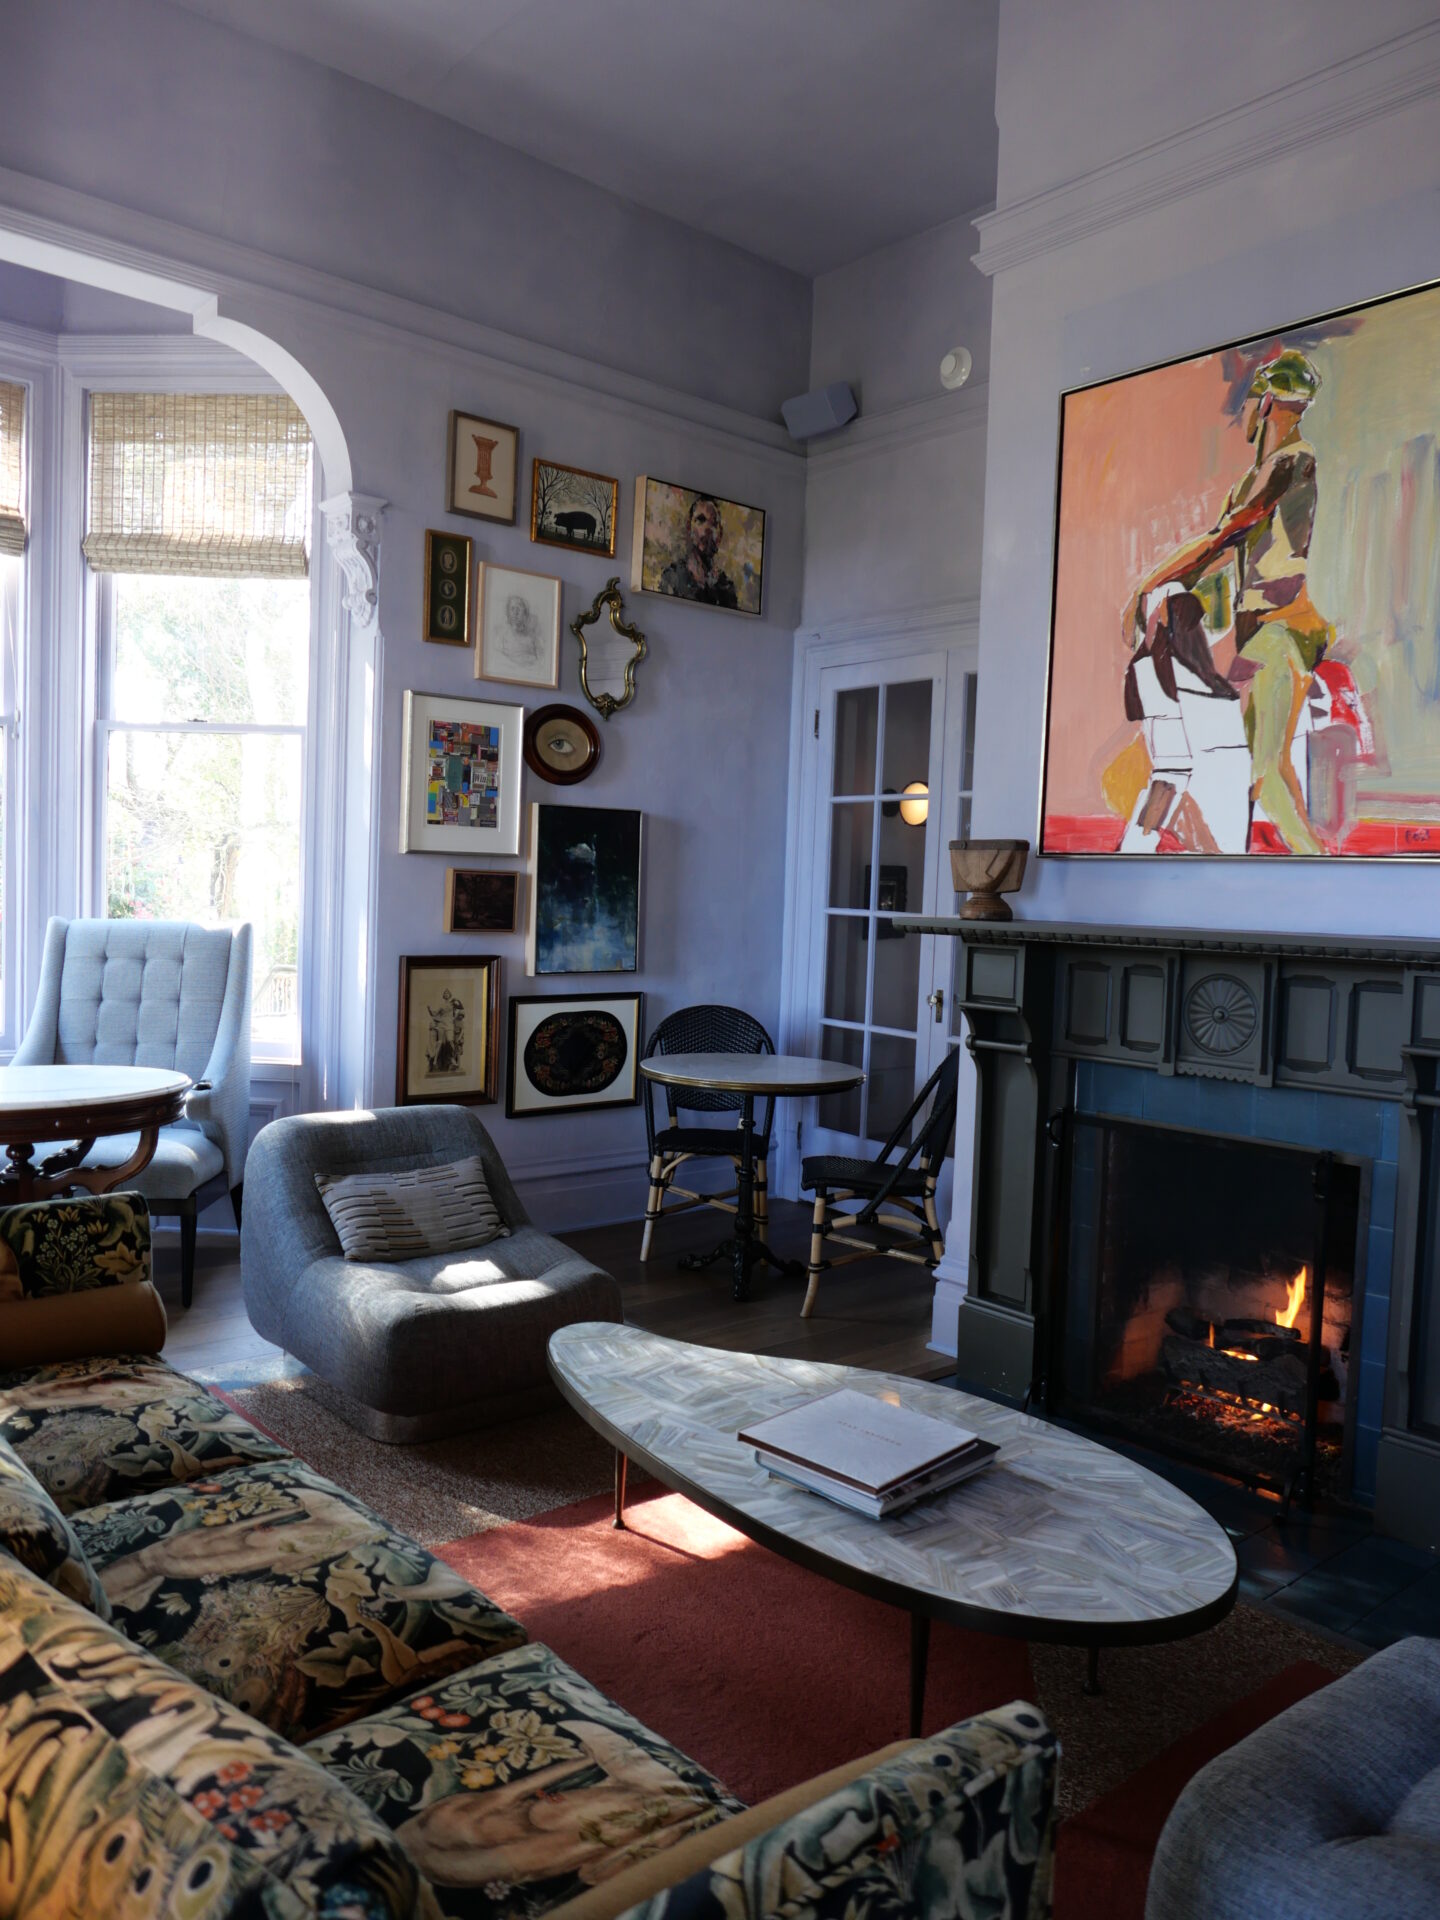 The lounge area at The Madrona Inn is a cozy and inviting space with art-filled walls.